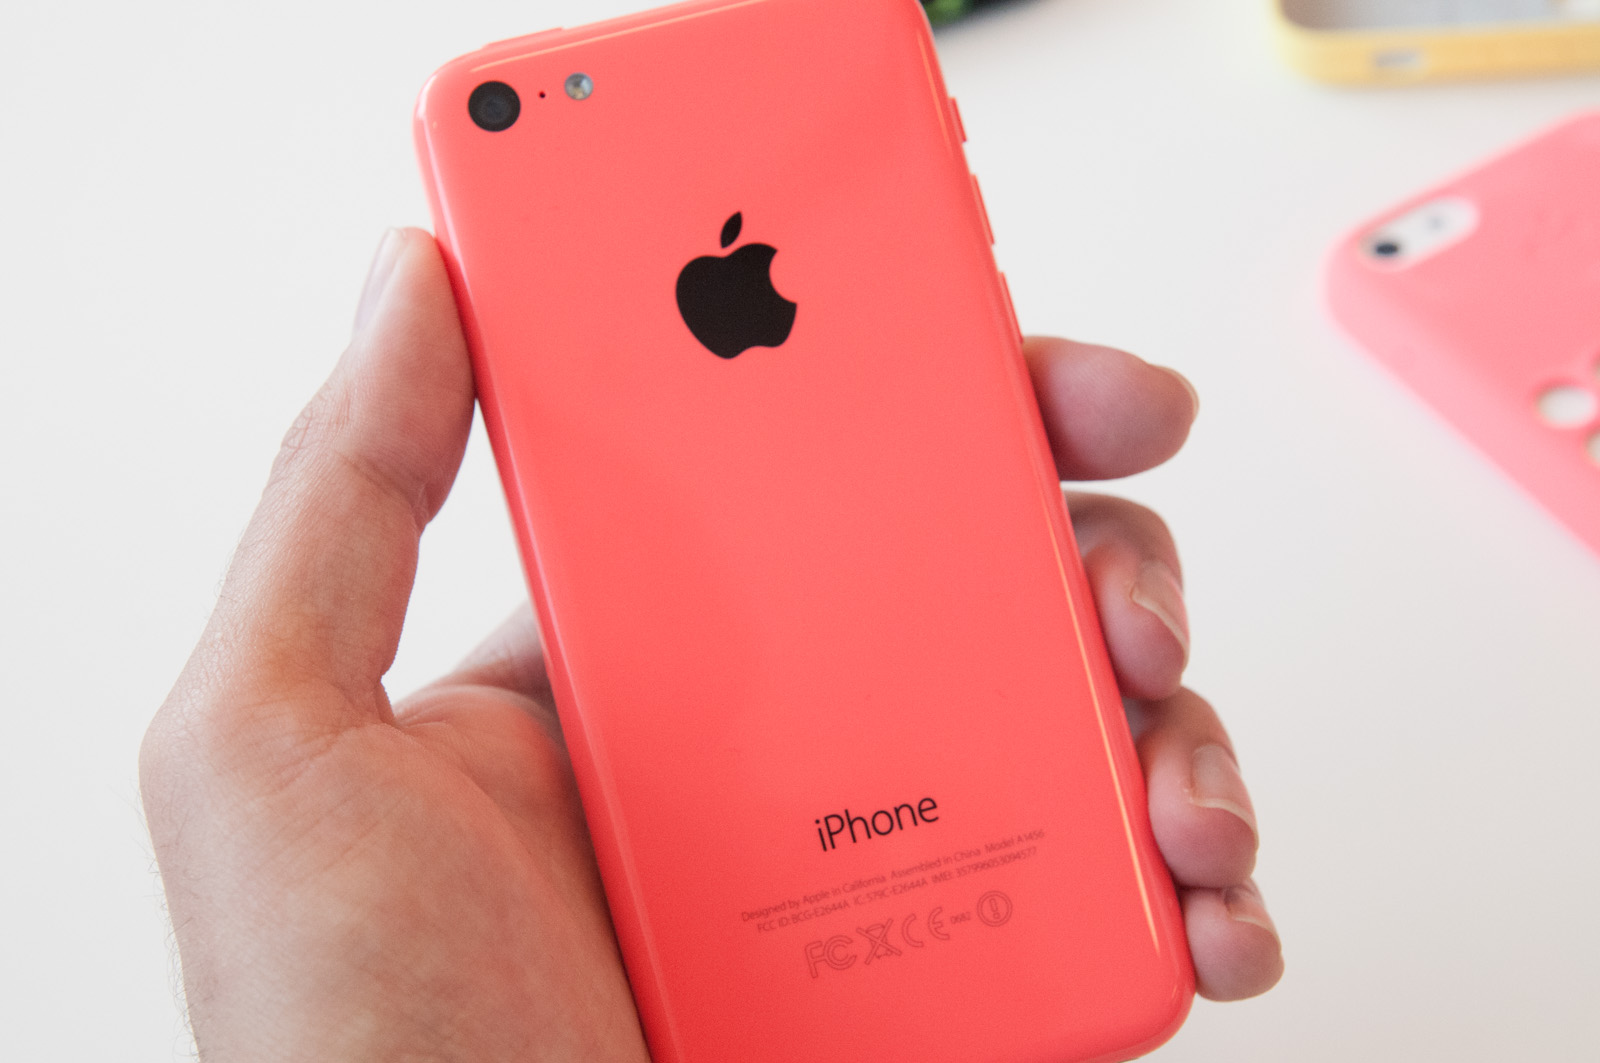 iPhone 5c Review: Apple's Colorful Take On The iPhone Is A Refreshing  Change Of Design Pace